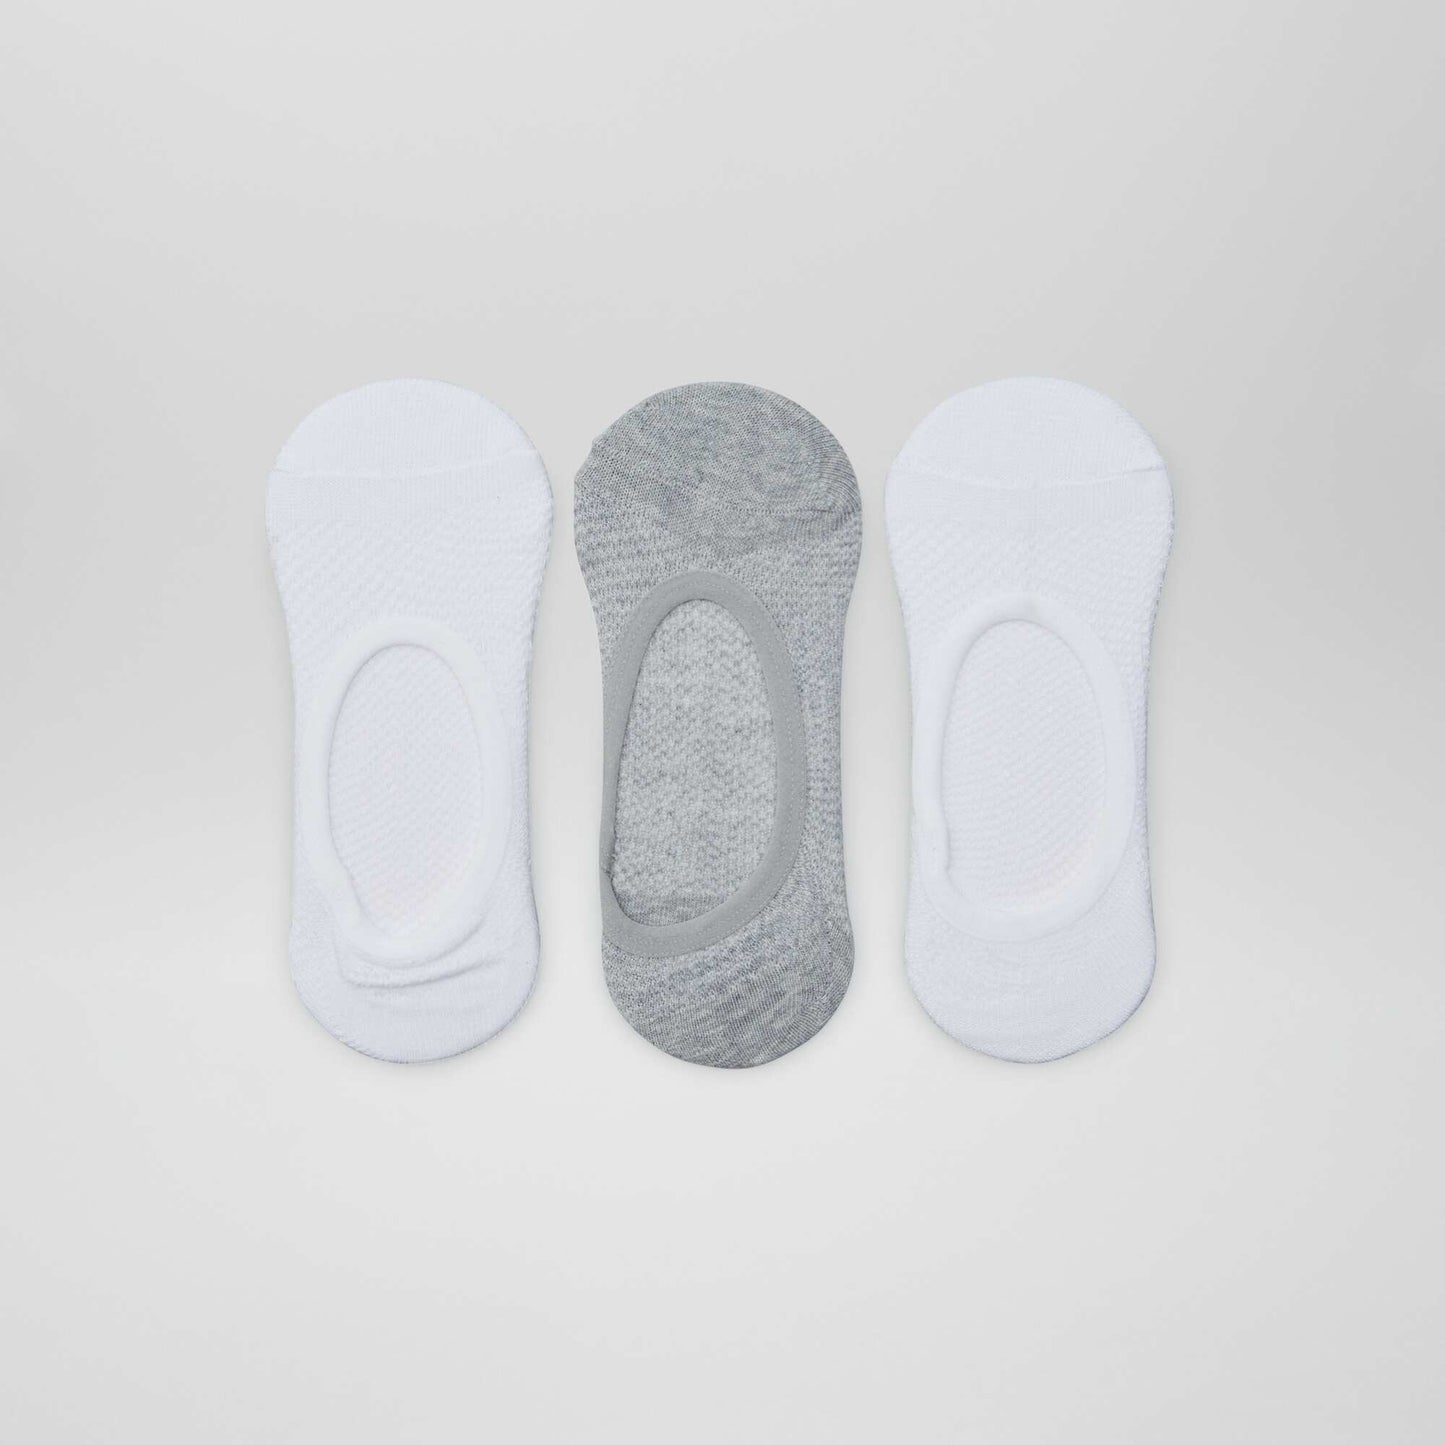 Pack of 3 pairs of ankle socks GREY